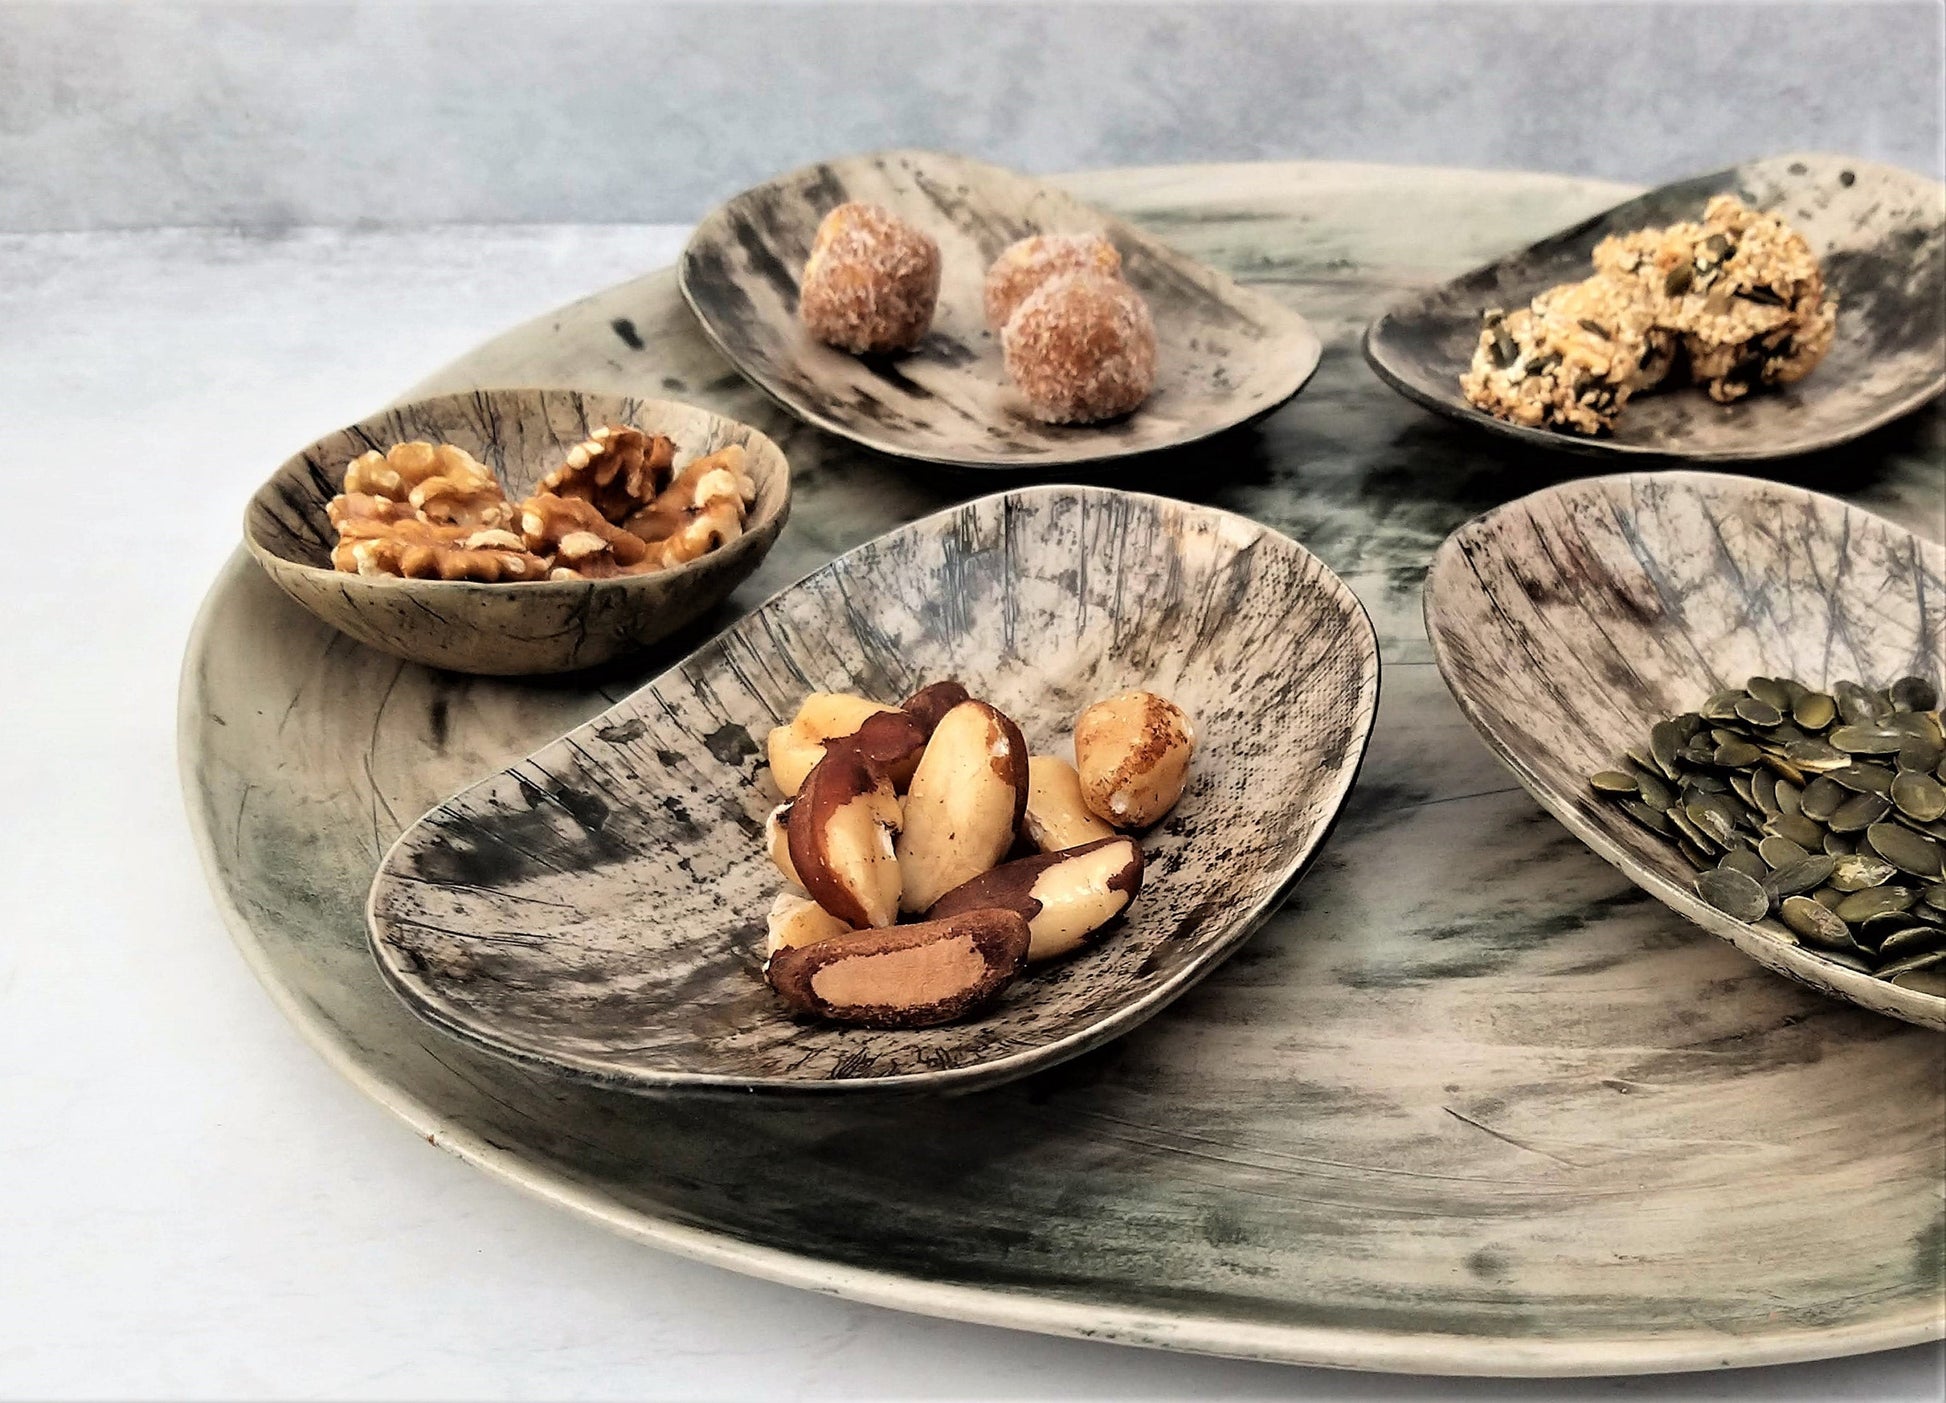 Oval ceramic plates in shades of gray with snacks